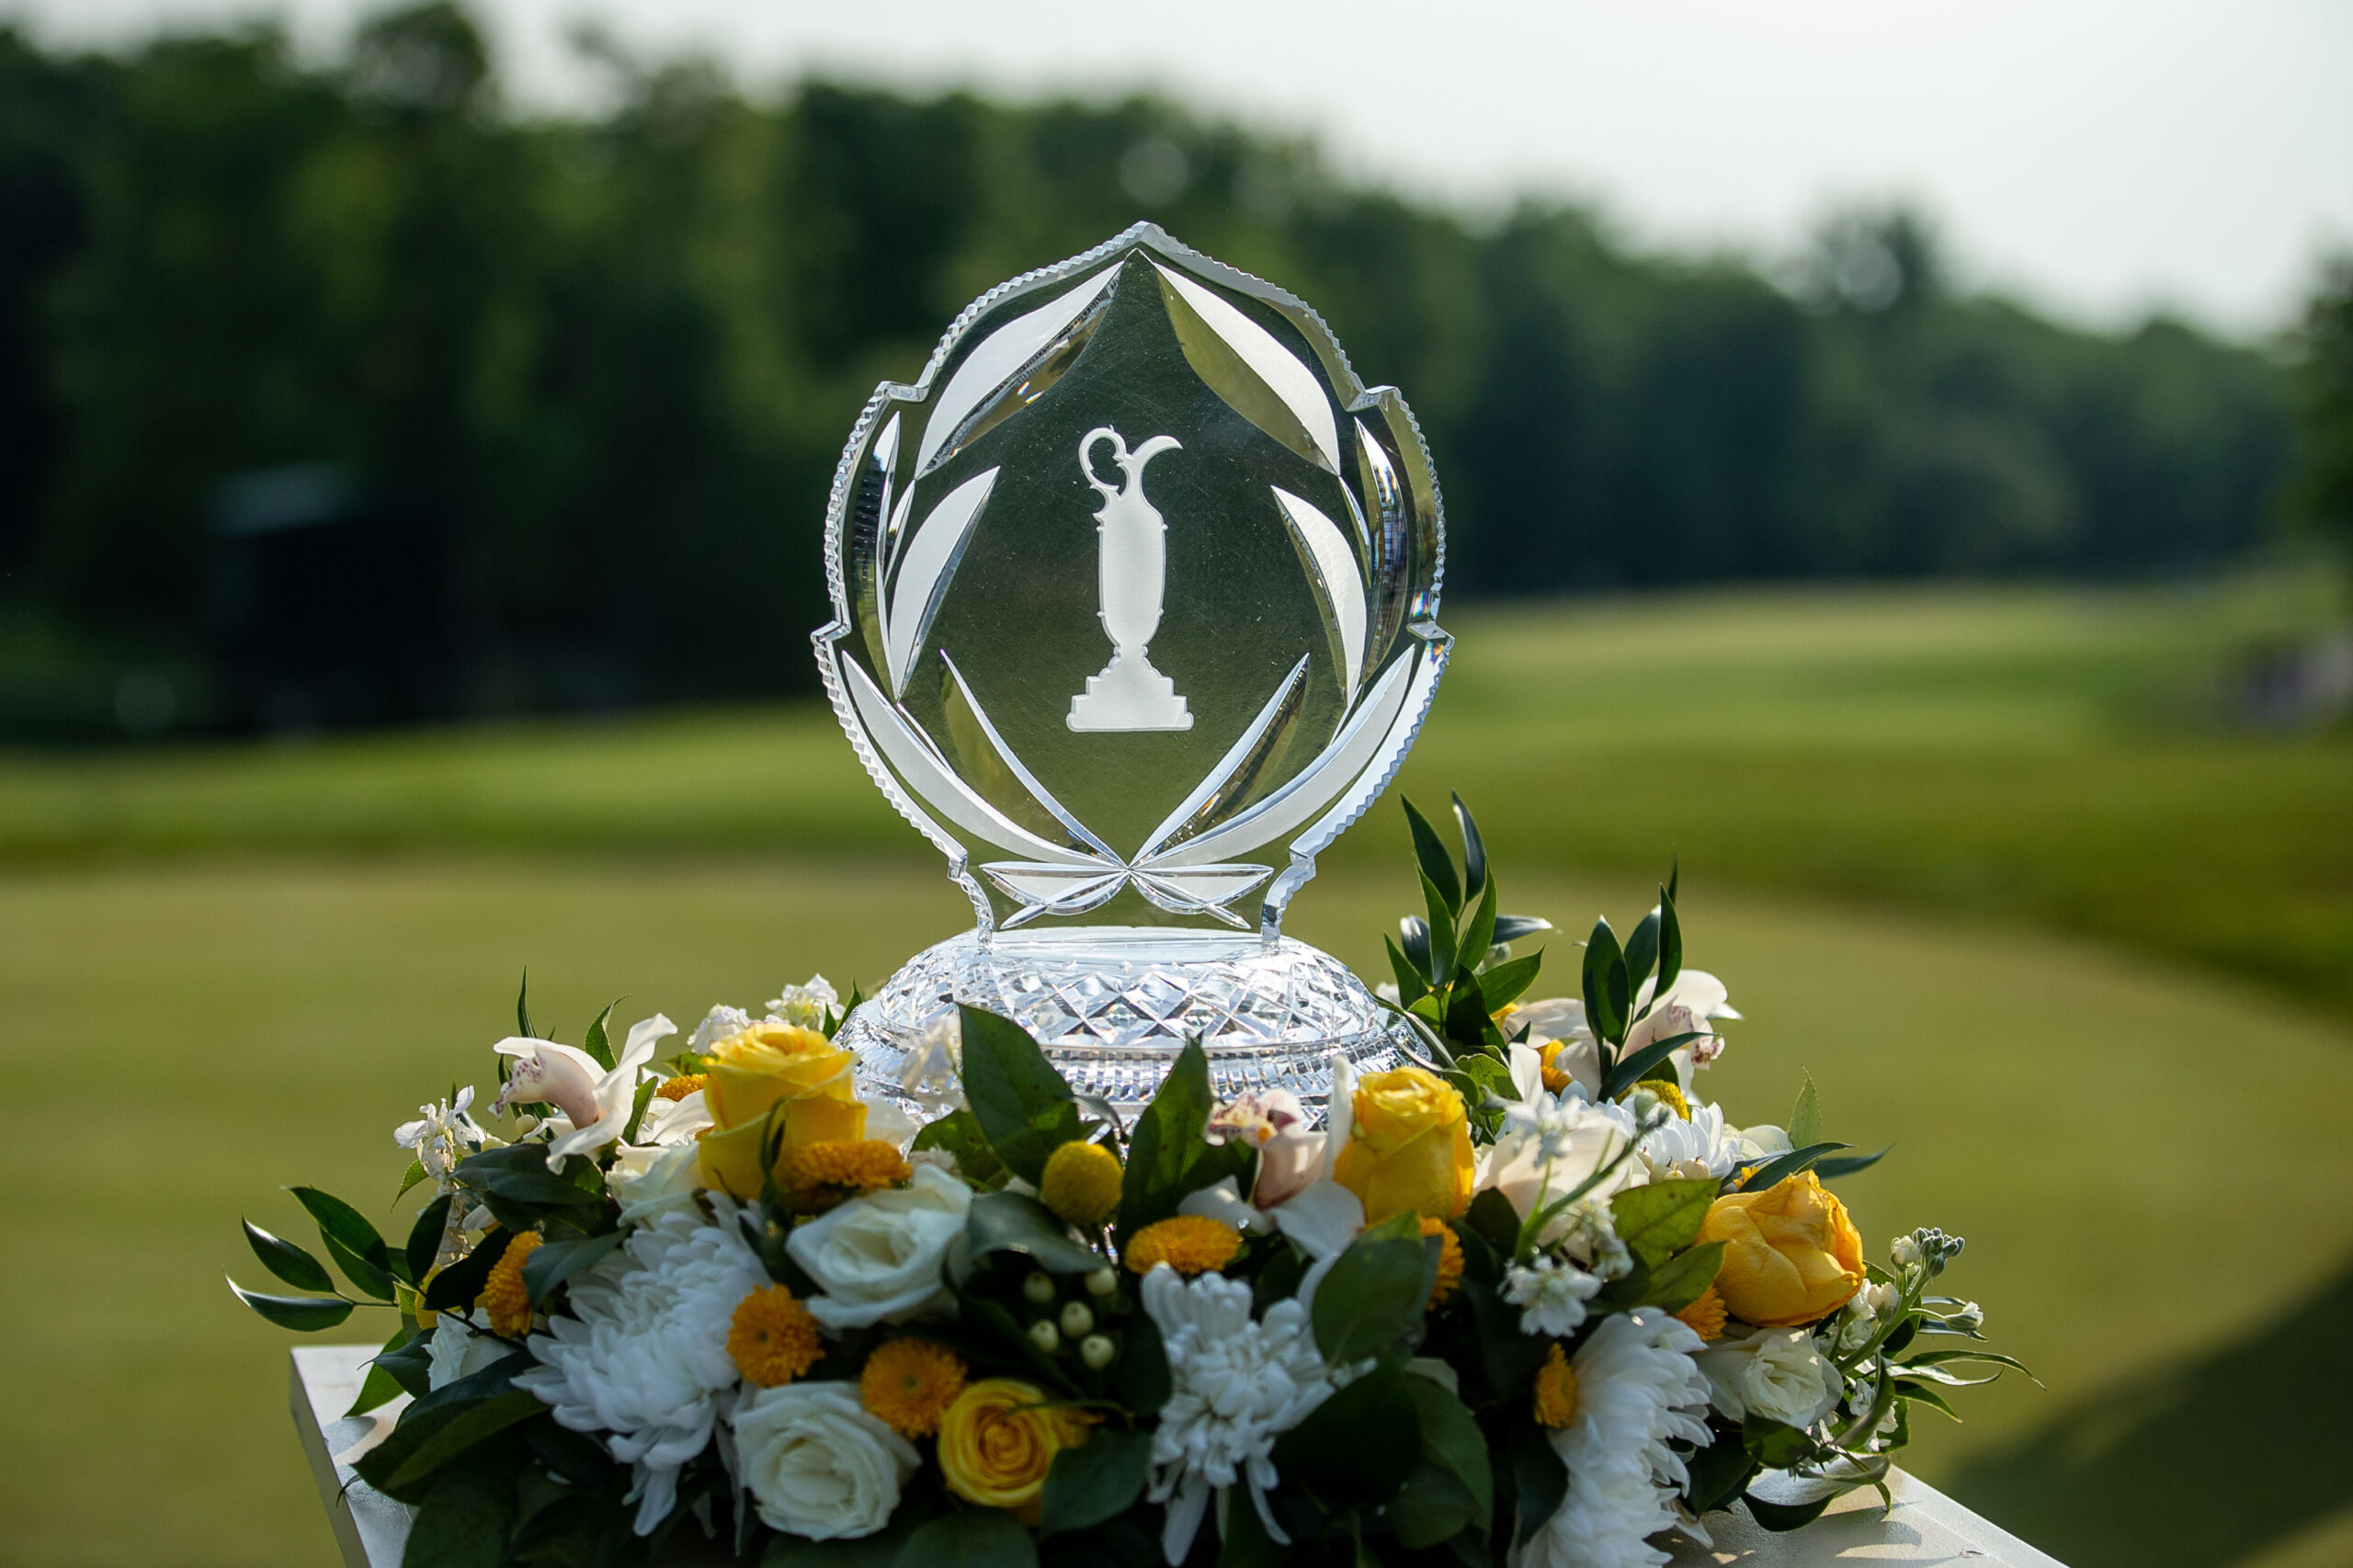 2023 Memorial Tournament: Prize Purse and Payouts by Position